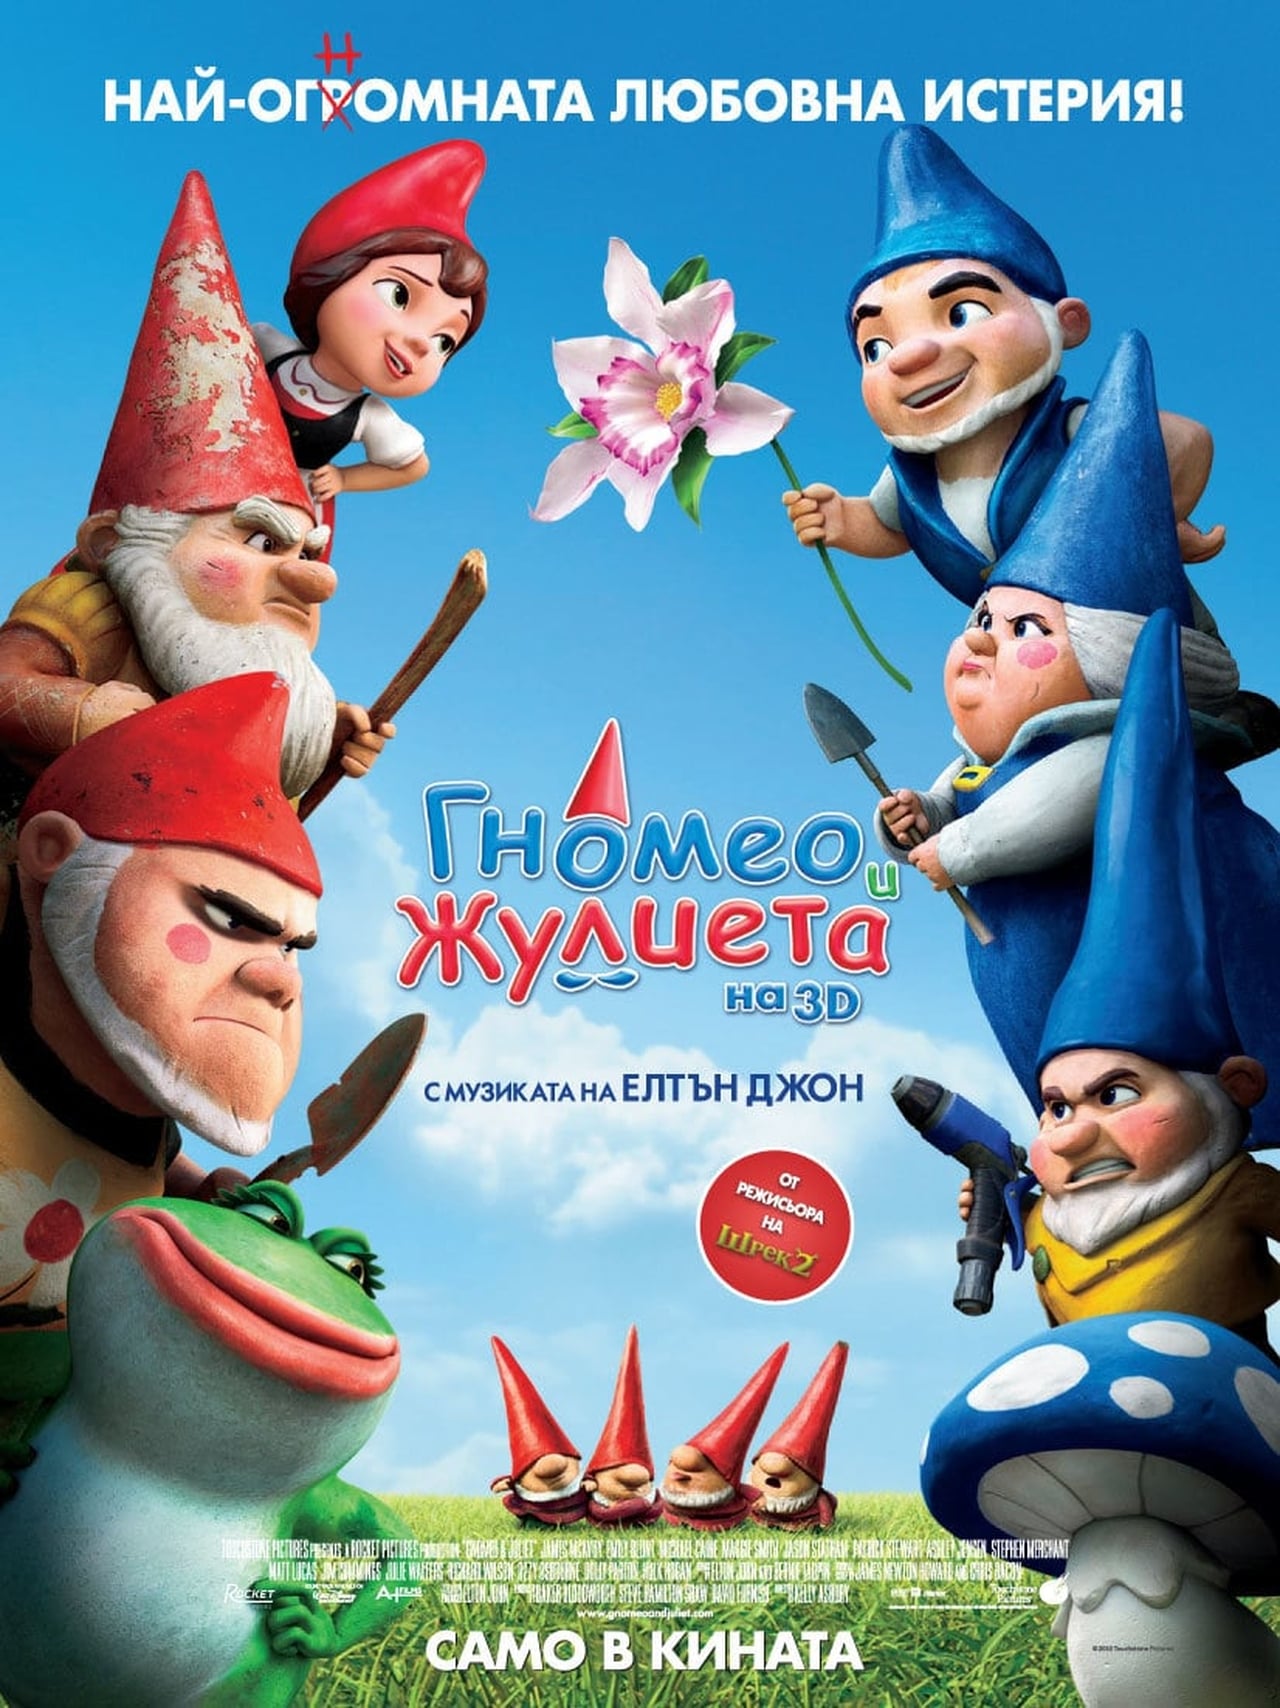 Download Gnomeo & Juliet wiki, synopsis, reviews, watch and download